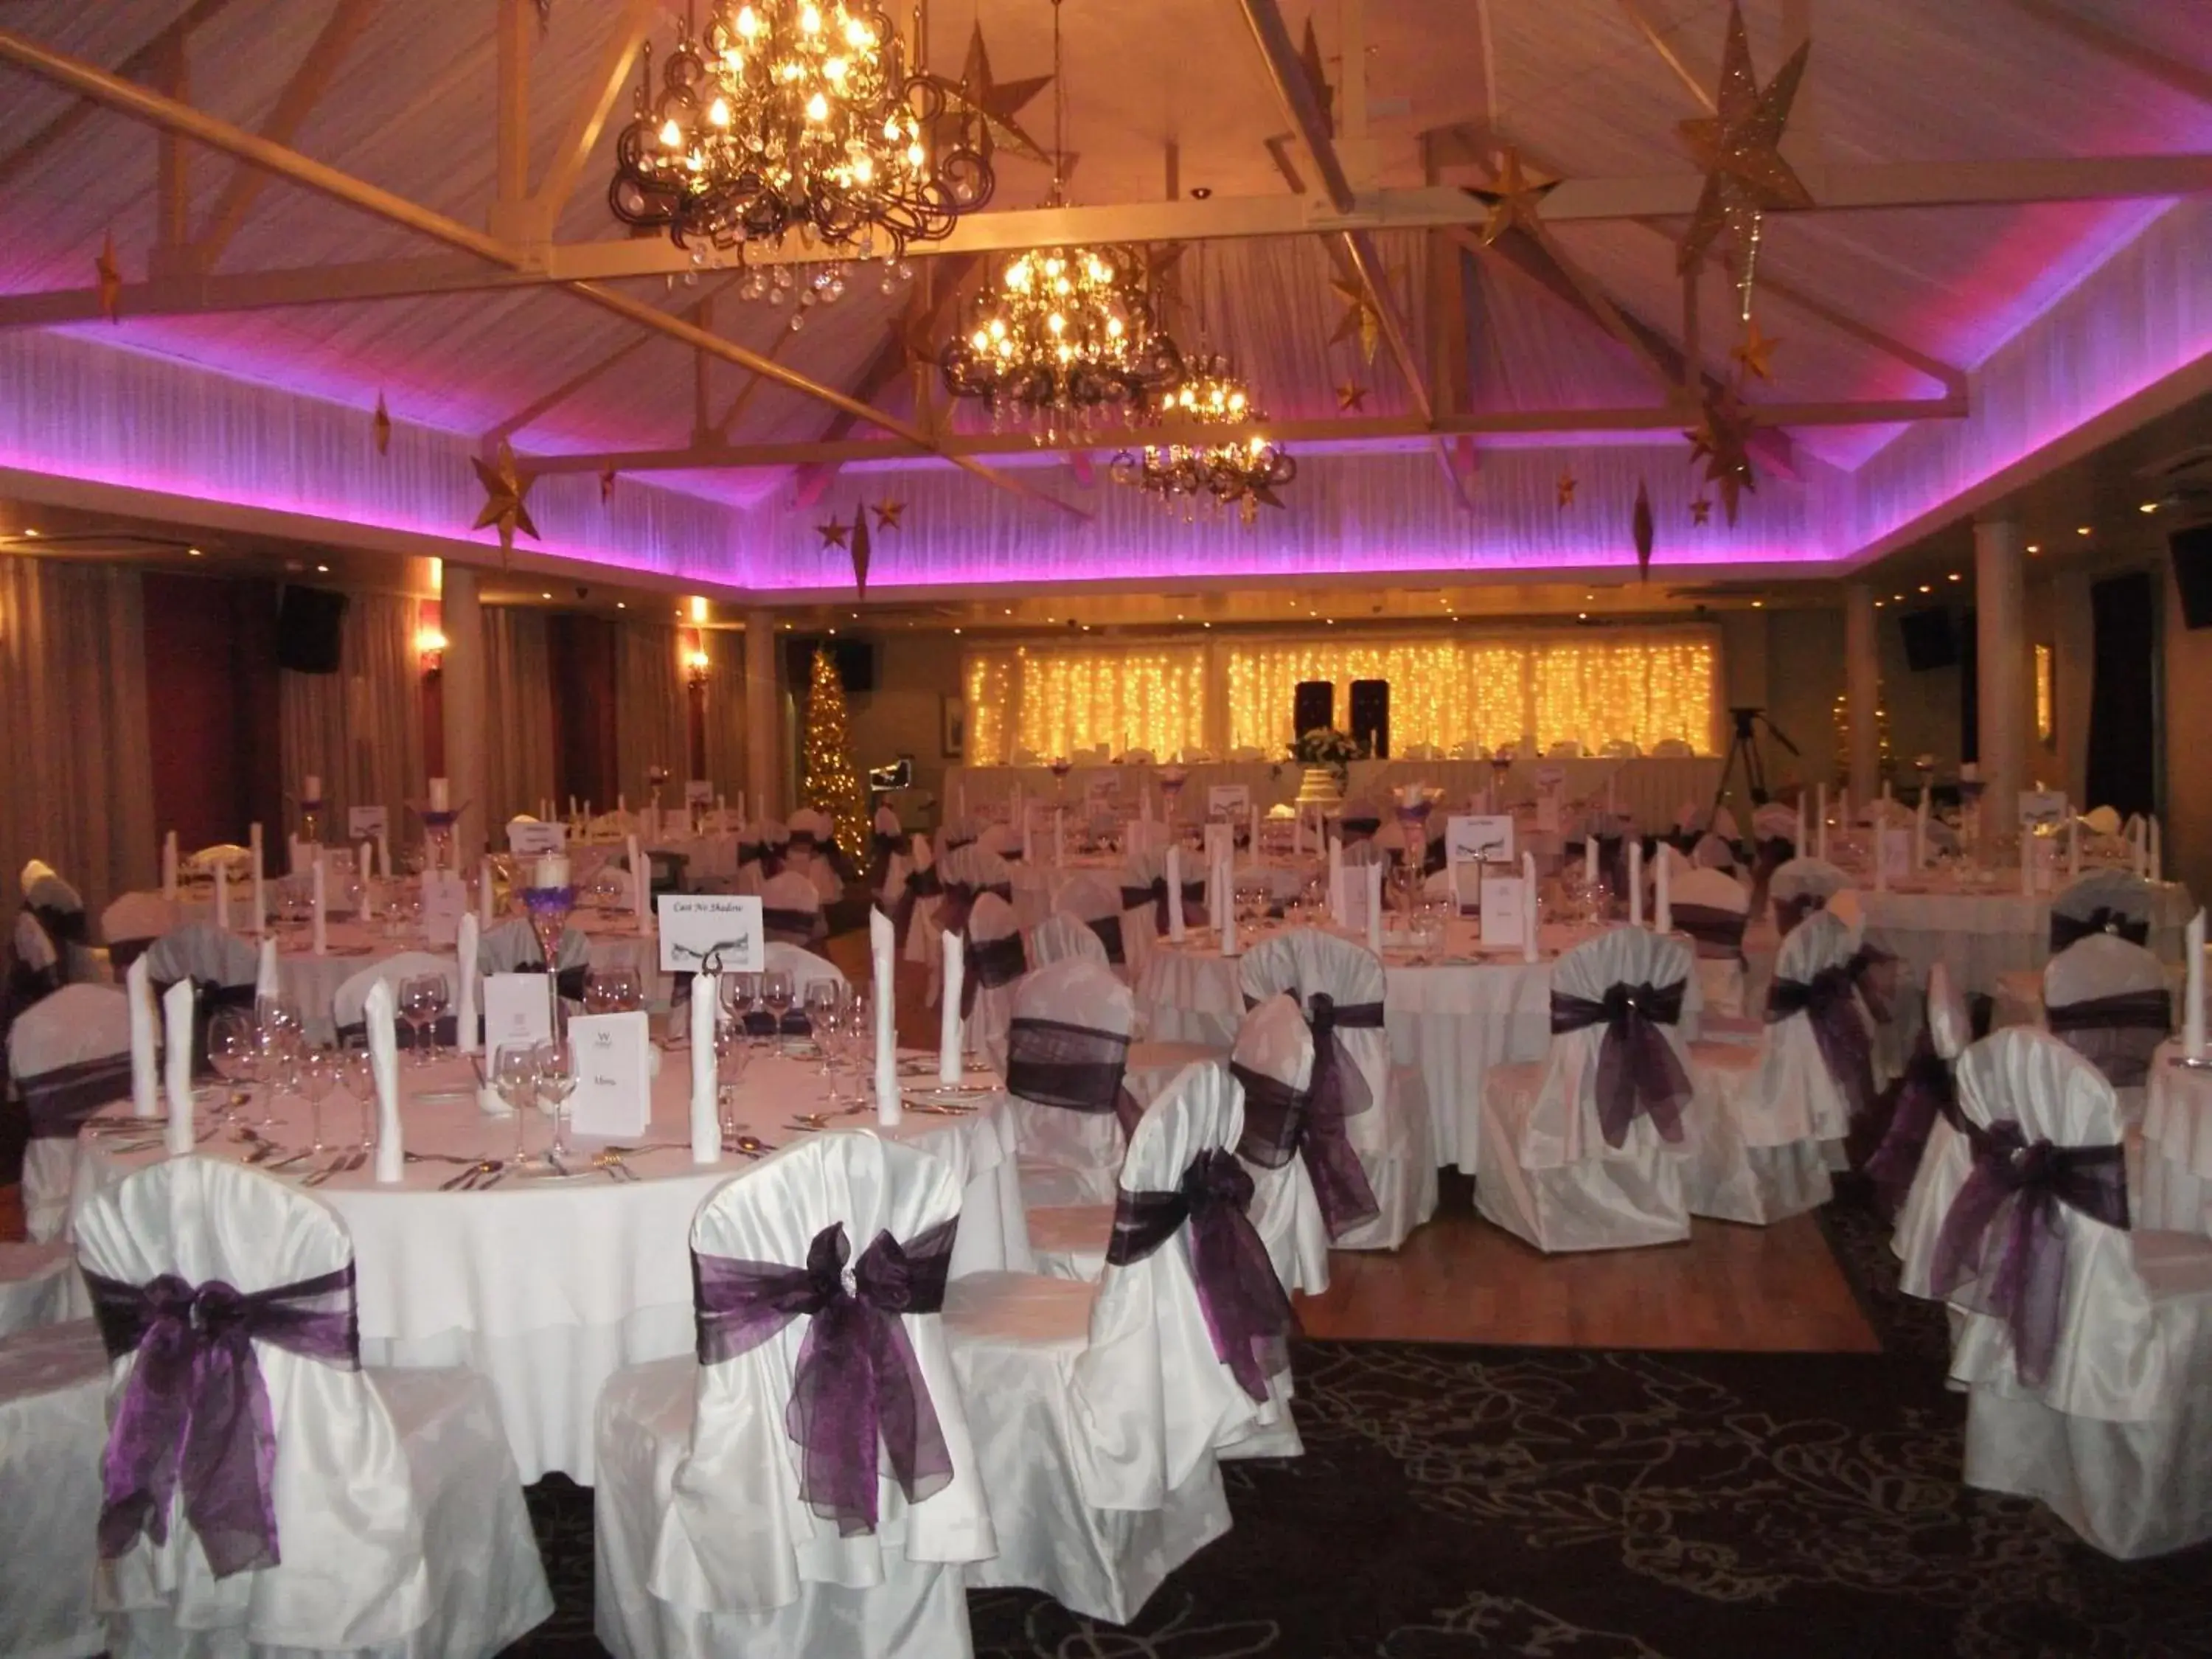 Banquet/Function facilities, Banquet Facilities in Waterfoot Hotel